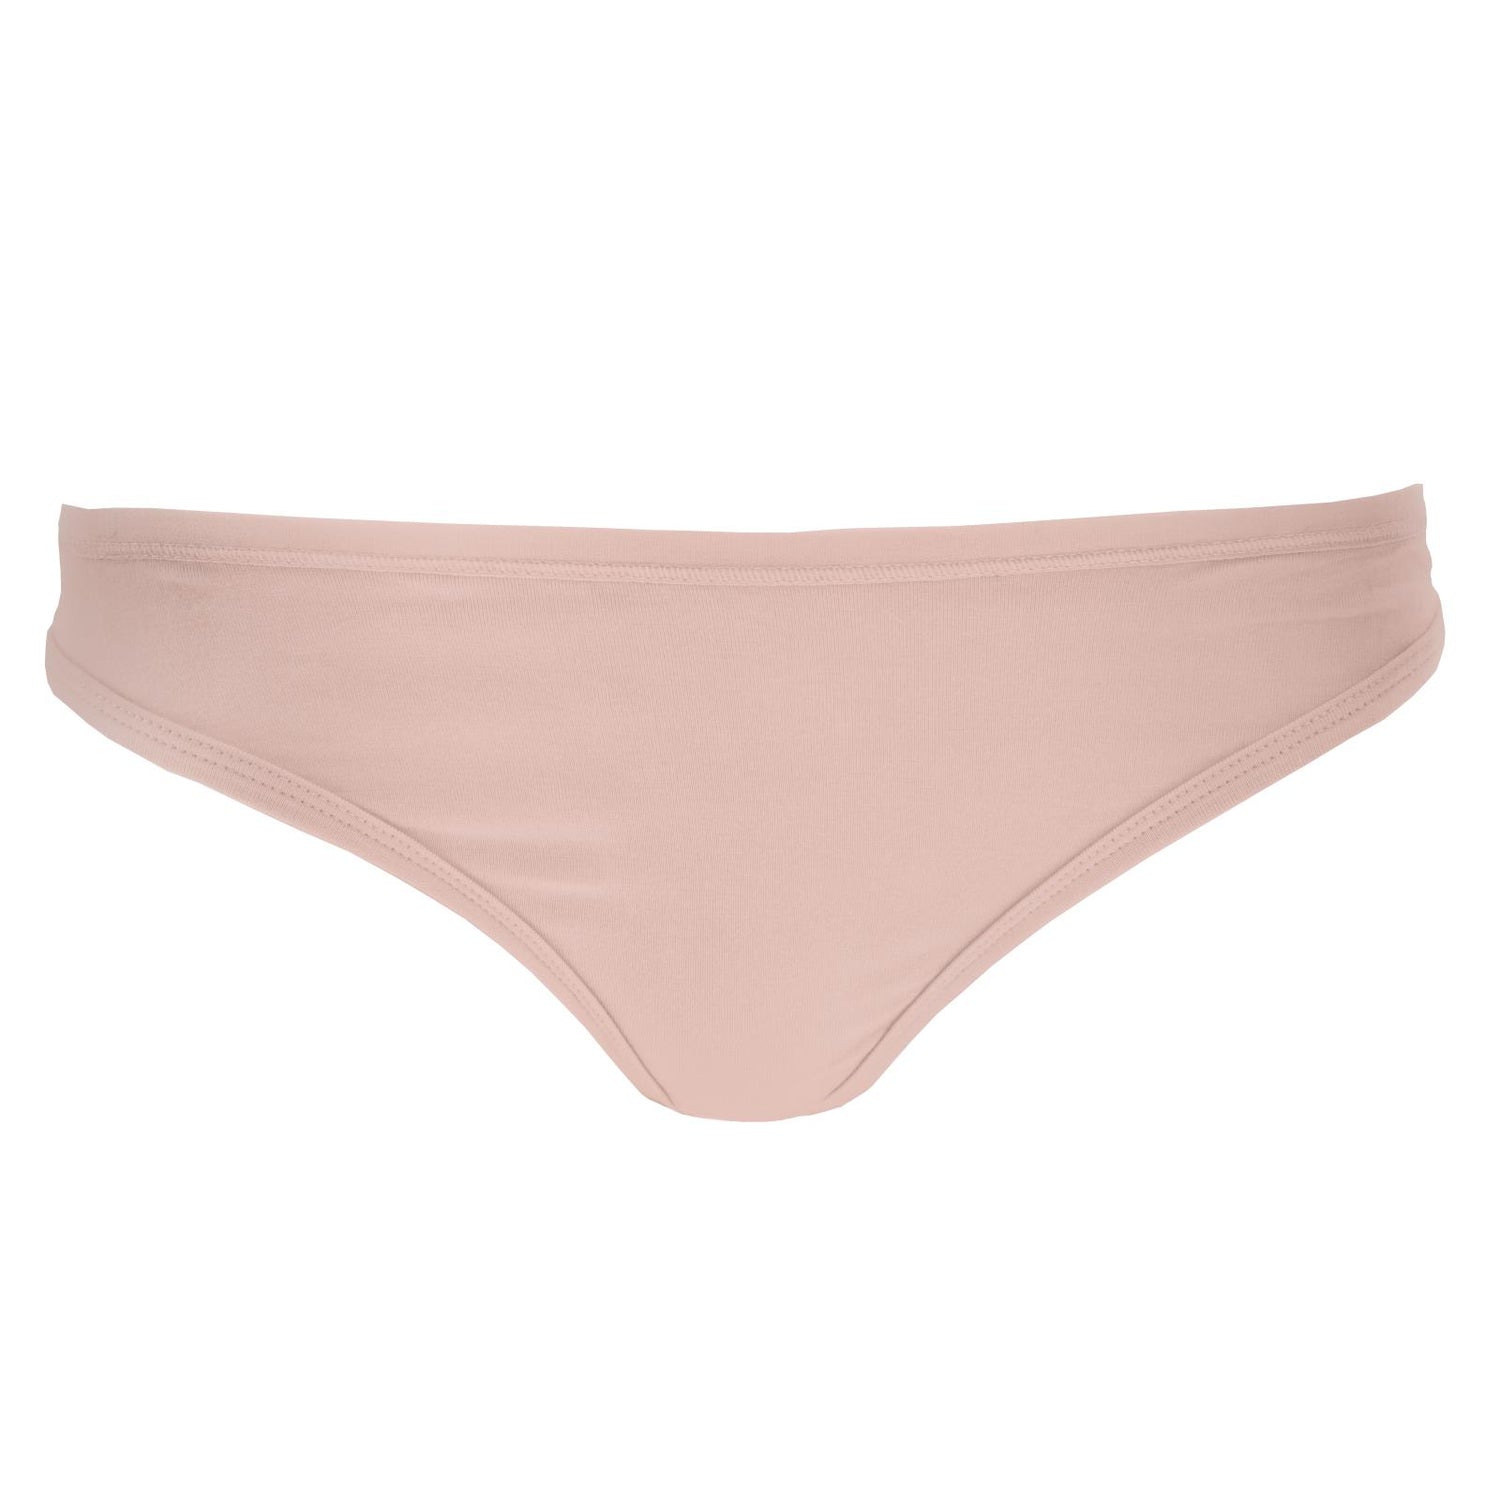 Women's Solid Classic Thong Underwear in Peach Blossom